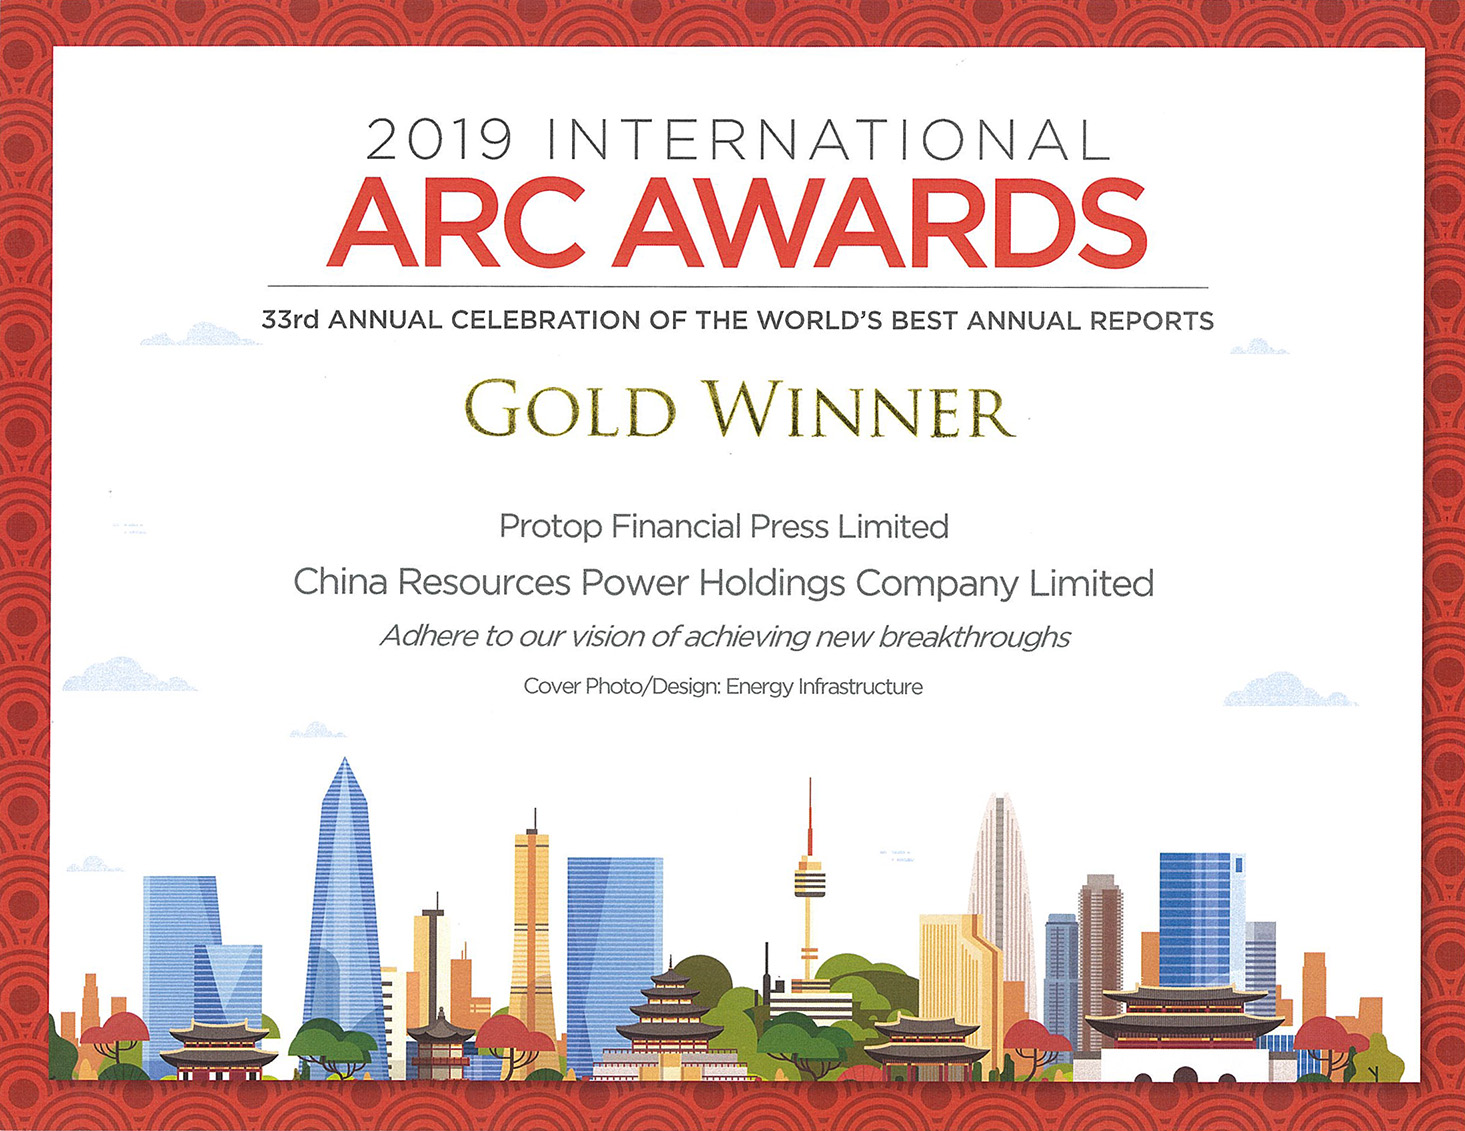 China Resources Power Holdings Company Limited – 2019 ARC AWARDS GOLD WINNER Cover Photo/Design: Energy Infrastructure